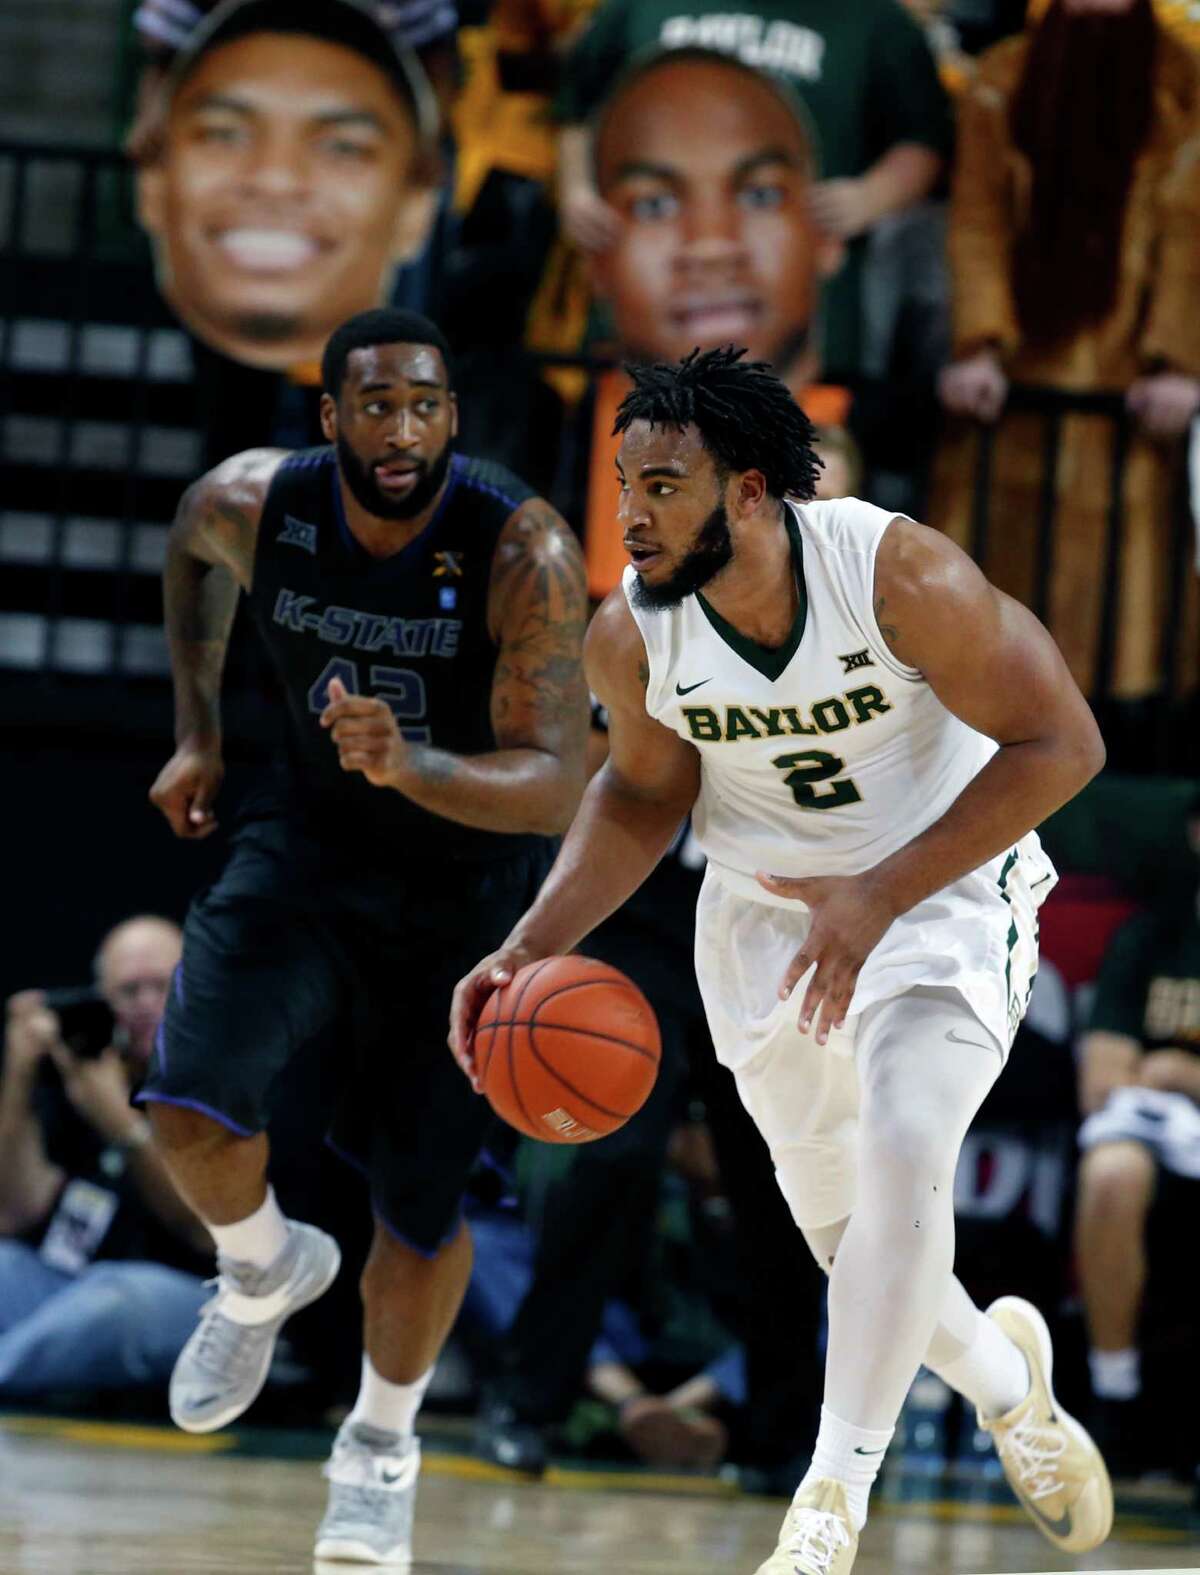 Baylor forward Rico Gathers (2), right, drives up court on Kansas State forward Thomas Gipson (42), left, in the second half of an NCAA college basketball game, Saturday, Feb. 21, 2015, in Waco, Texas. Baylor won 69-42. (AP Photo/Rod Aydelotte)